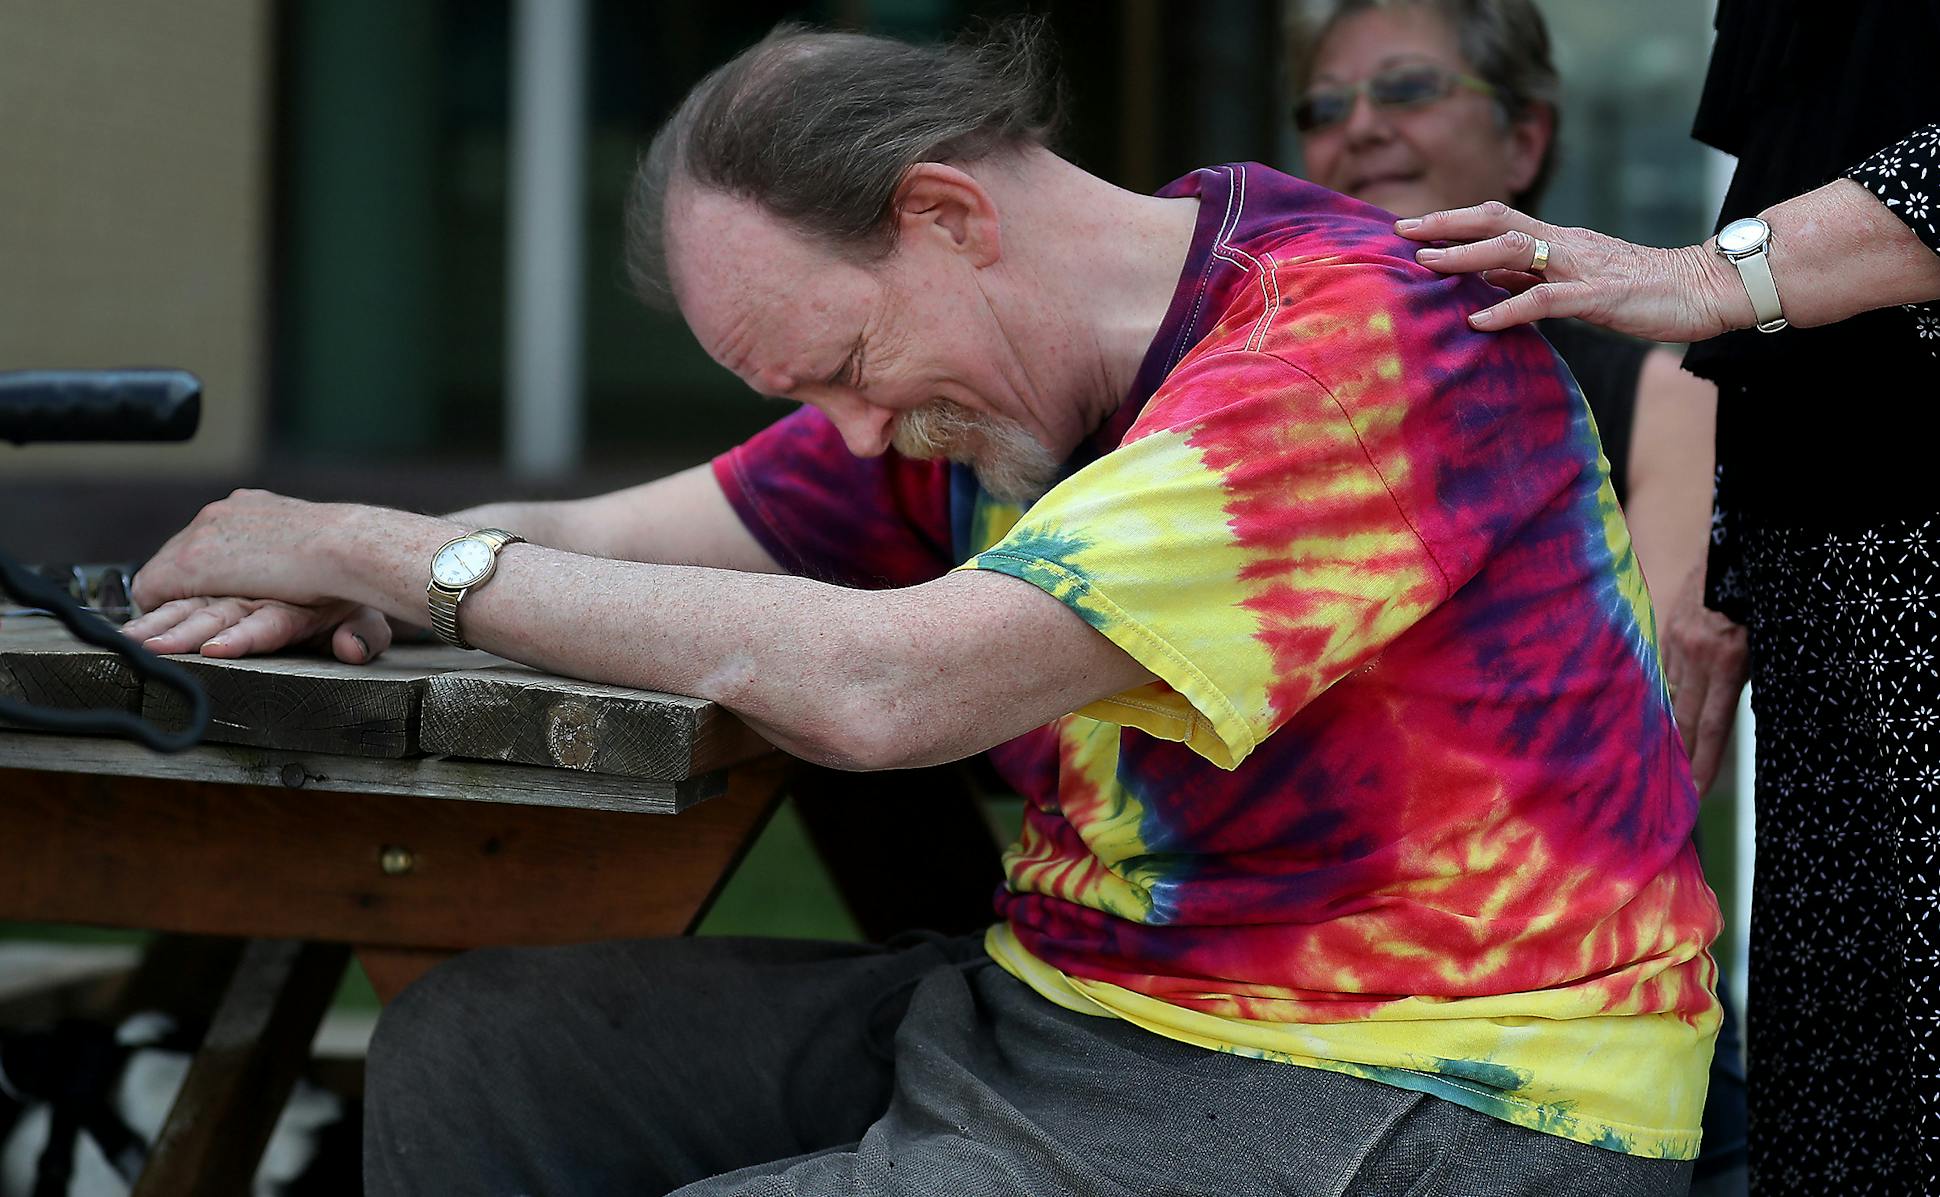 Robert Krause, surrounded by family, sobbed outside the courthouse in July as he heard that his mother's attacker had pleaded guilty to sexual assault. The family didn't know about the attack until nearly a year after she died.